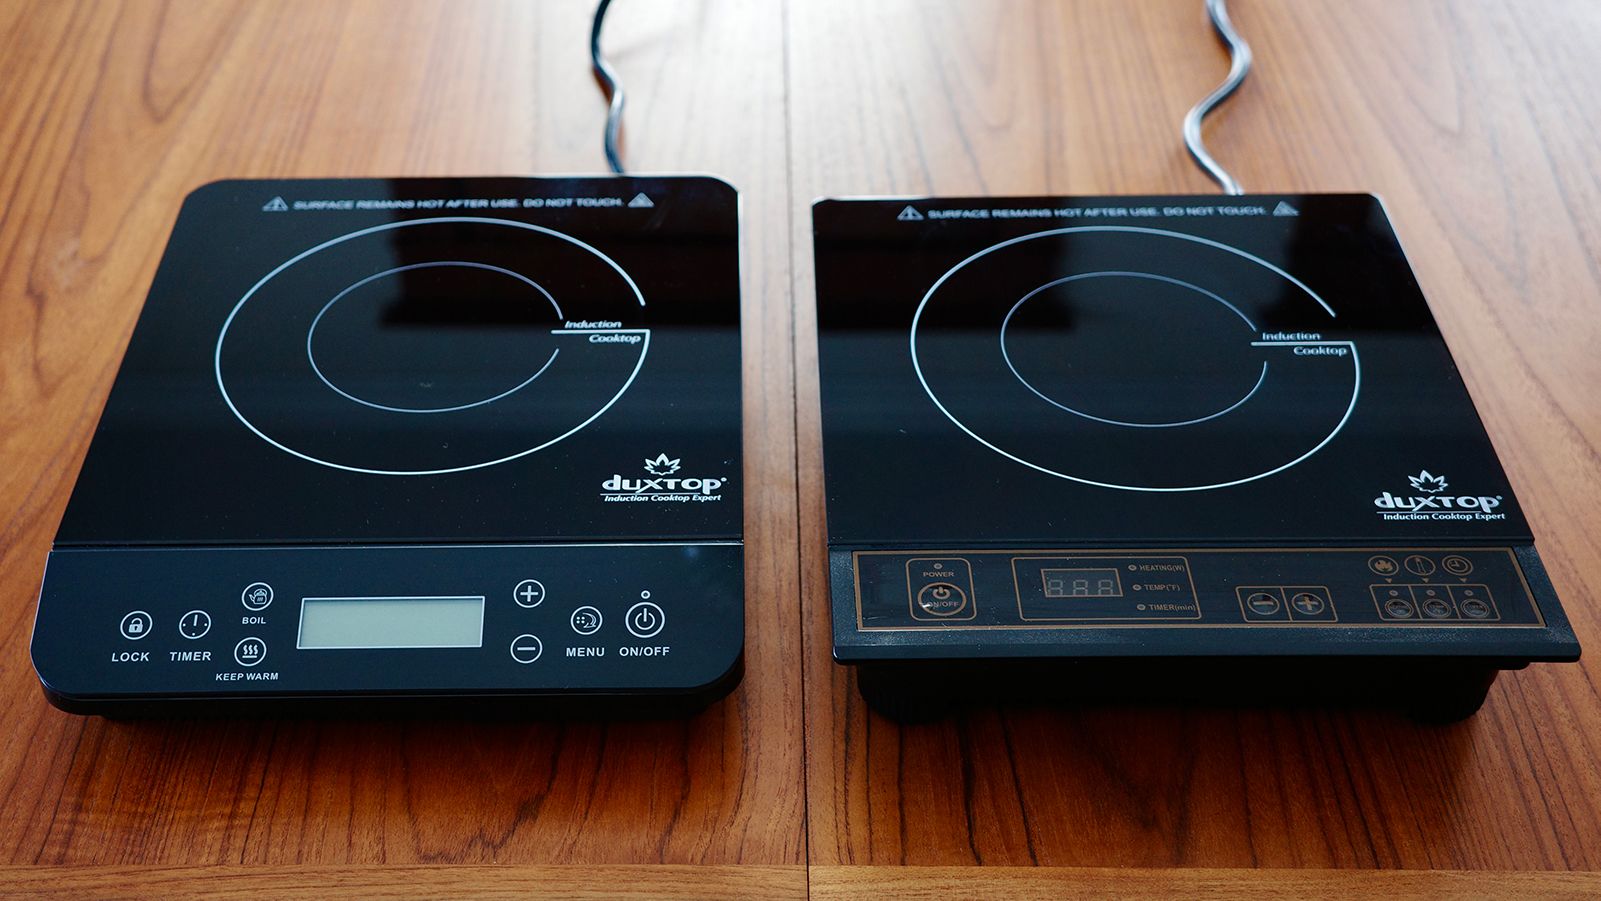 Best Portable Induction Cooktop  Top 10 Electric Burners 🔥 